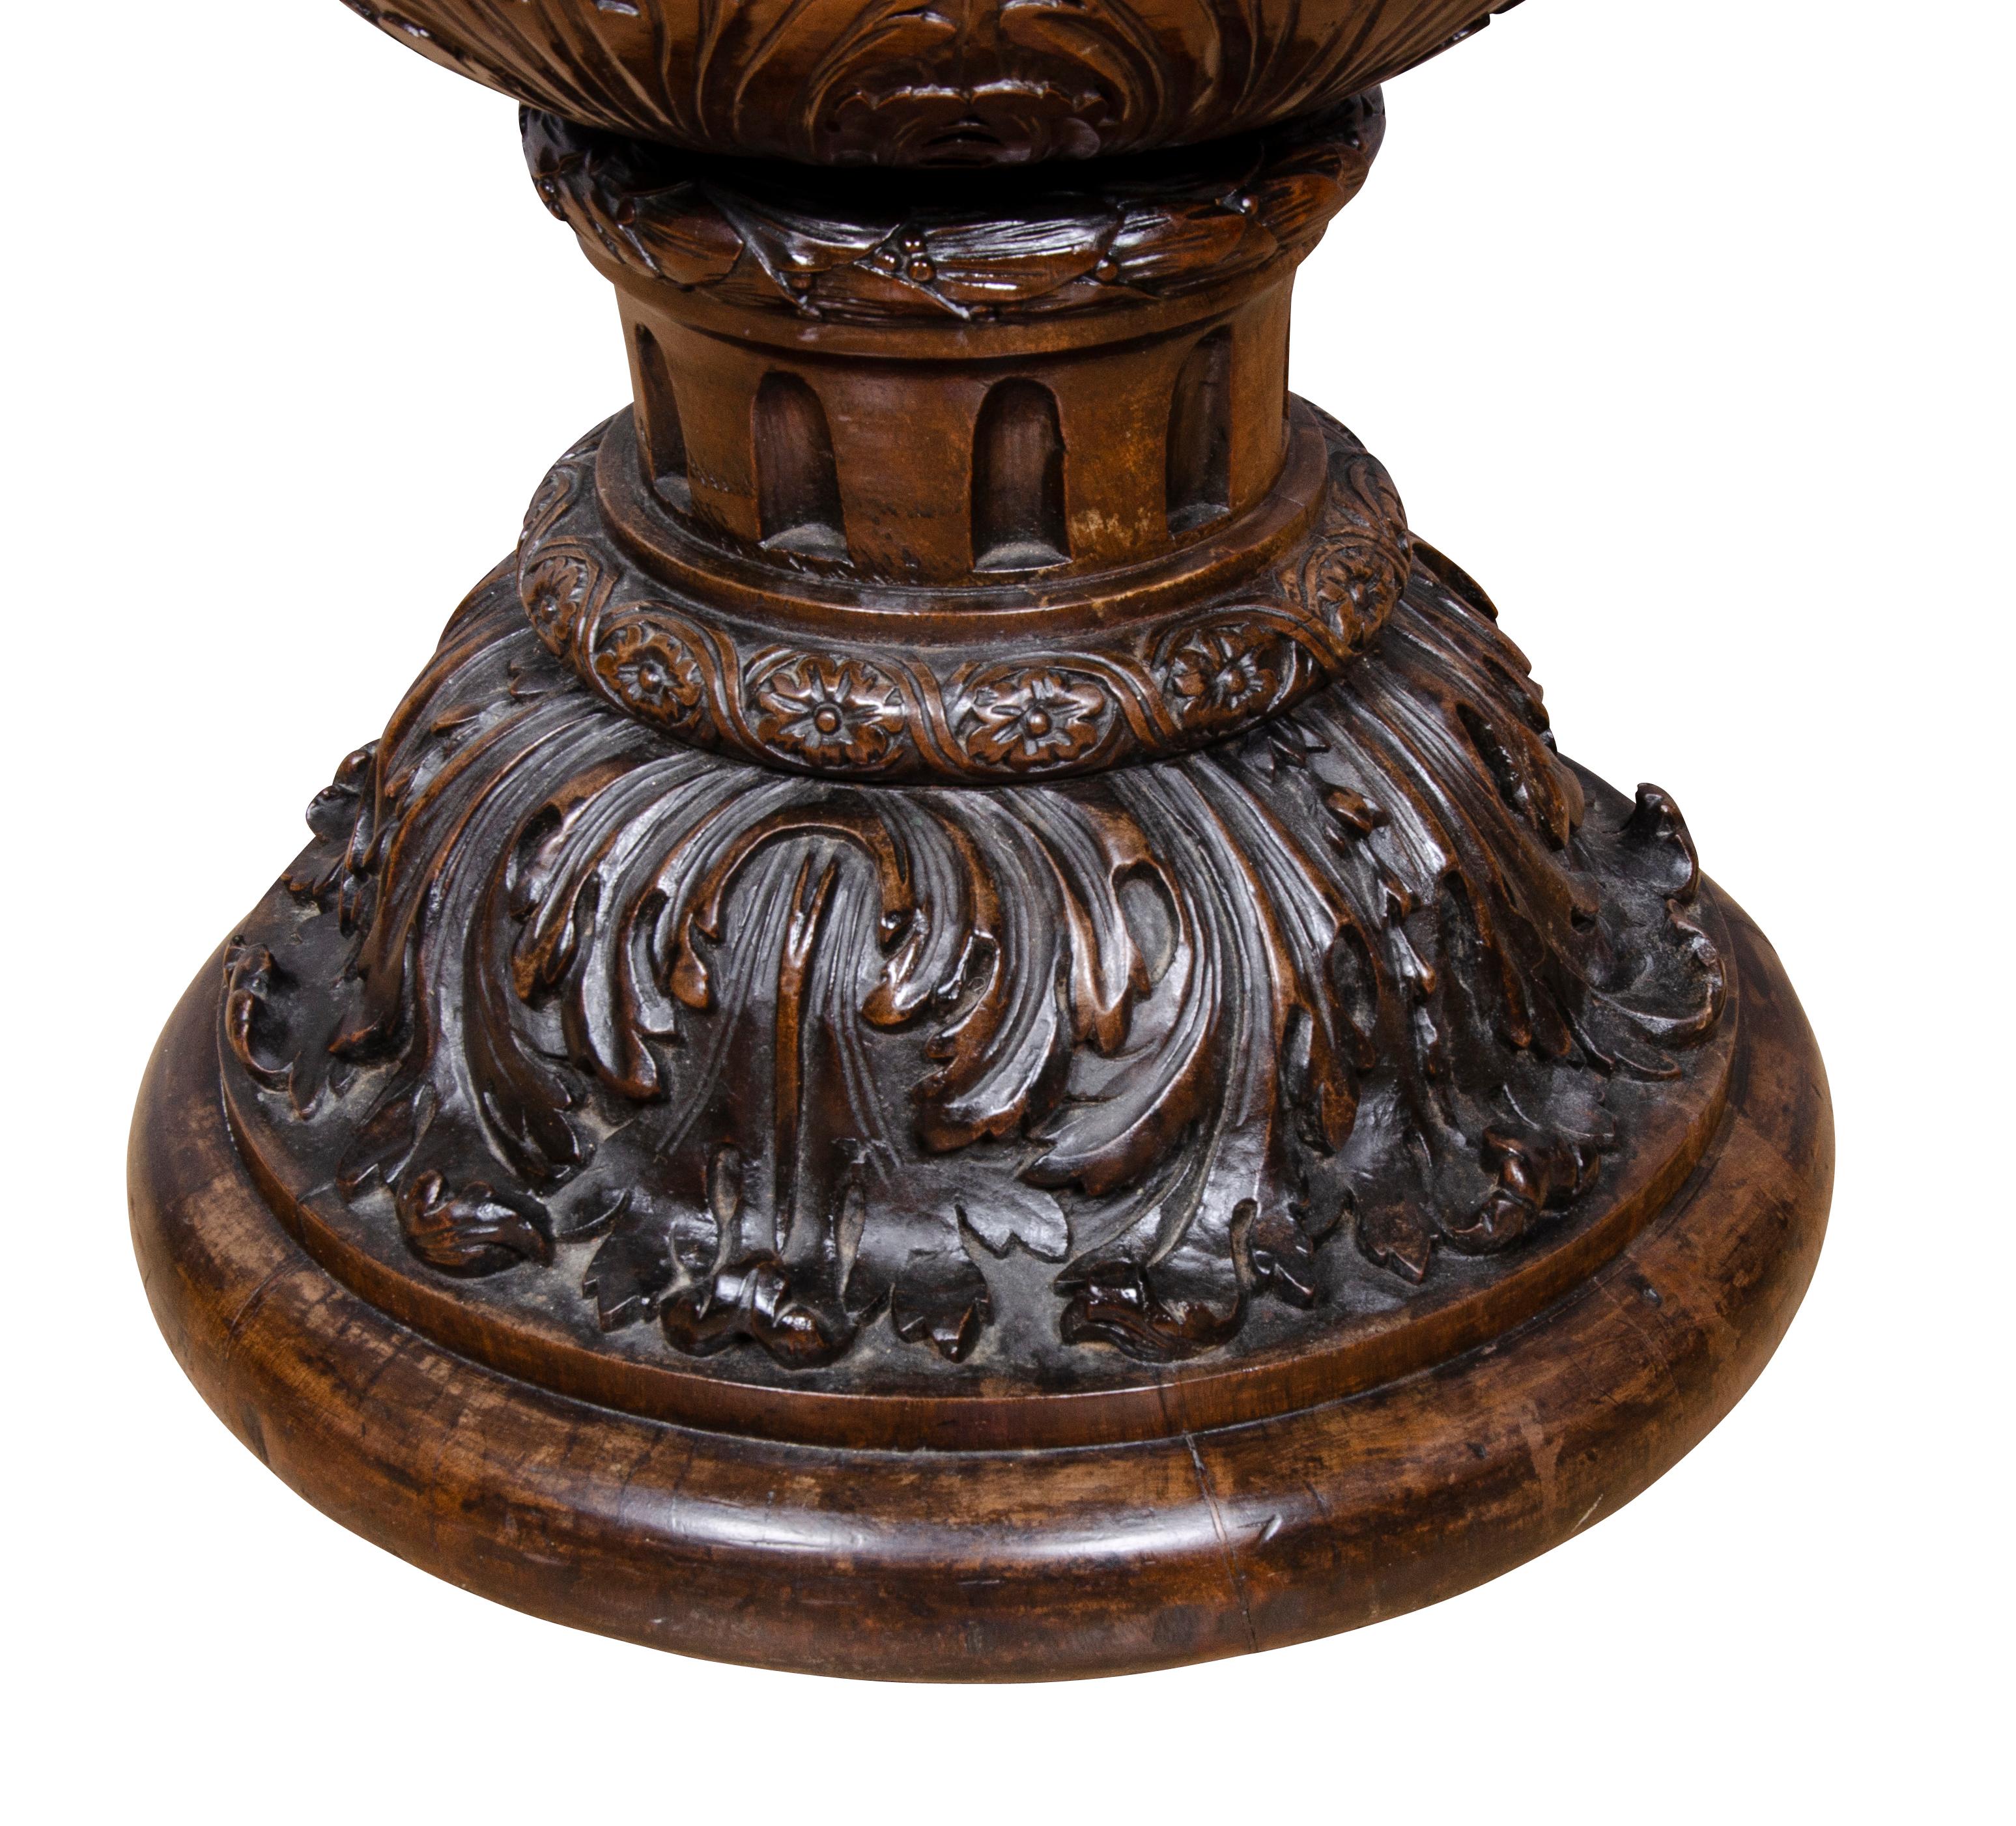 Shaped like a goblet. Tapered form carved and hollowed from a single piece of wood, the exterior decorated with a bacchanalian parade of figures of Pan playing instruments on and pulling a wagon, grape leaves and merriment, lower section of urn with